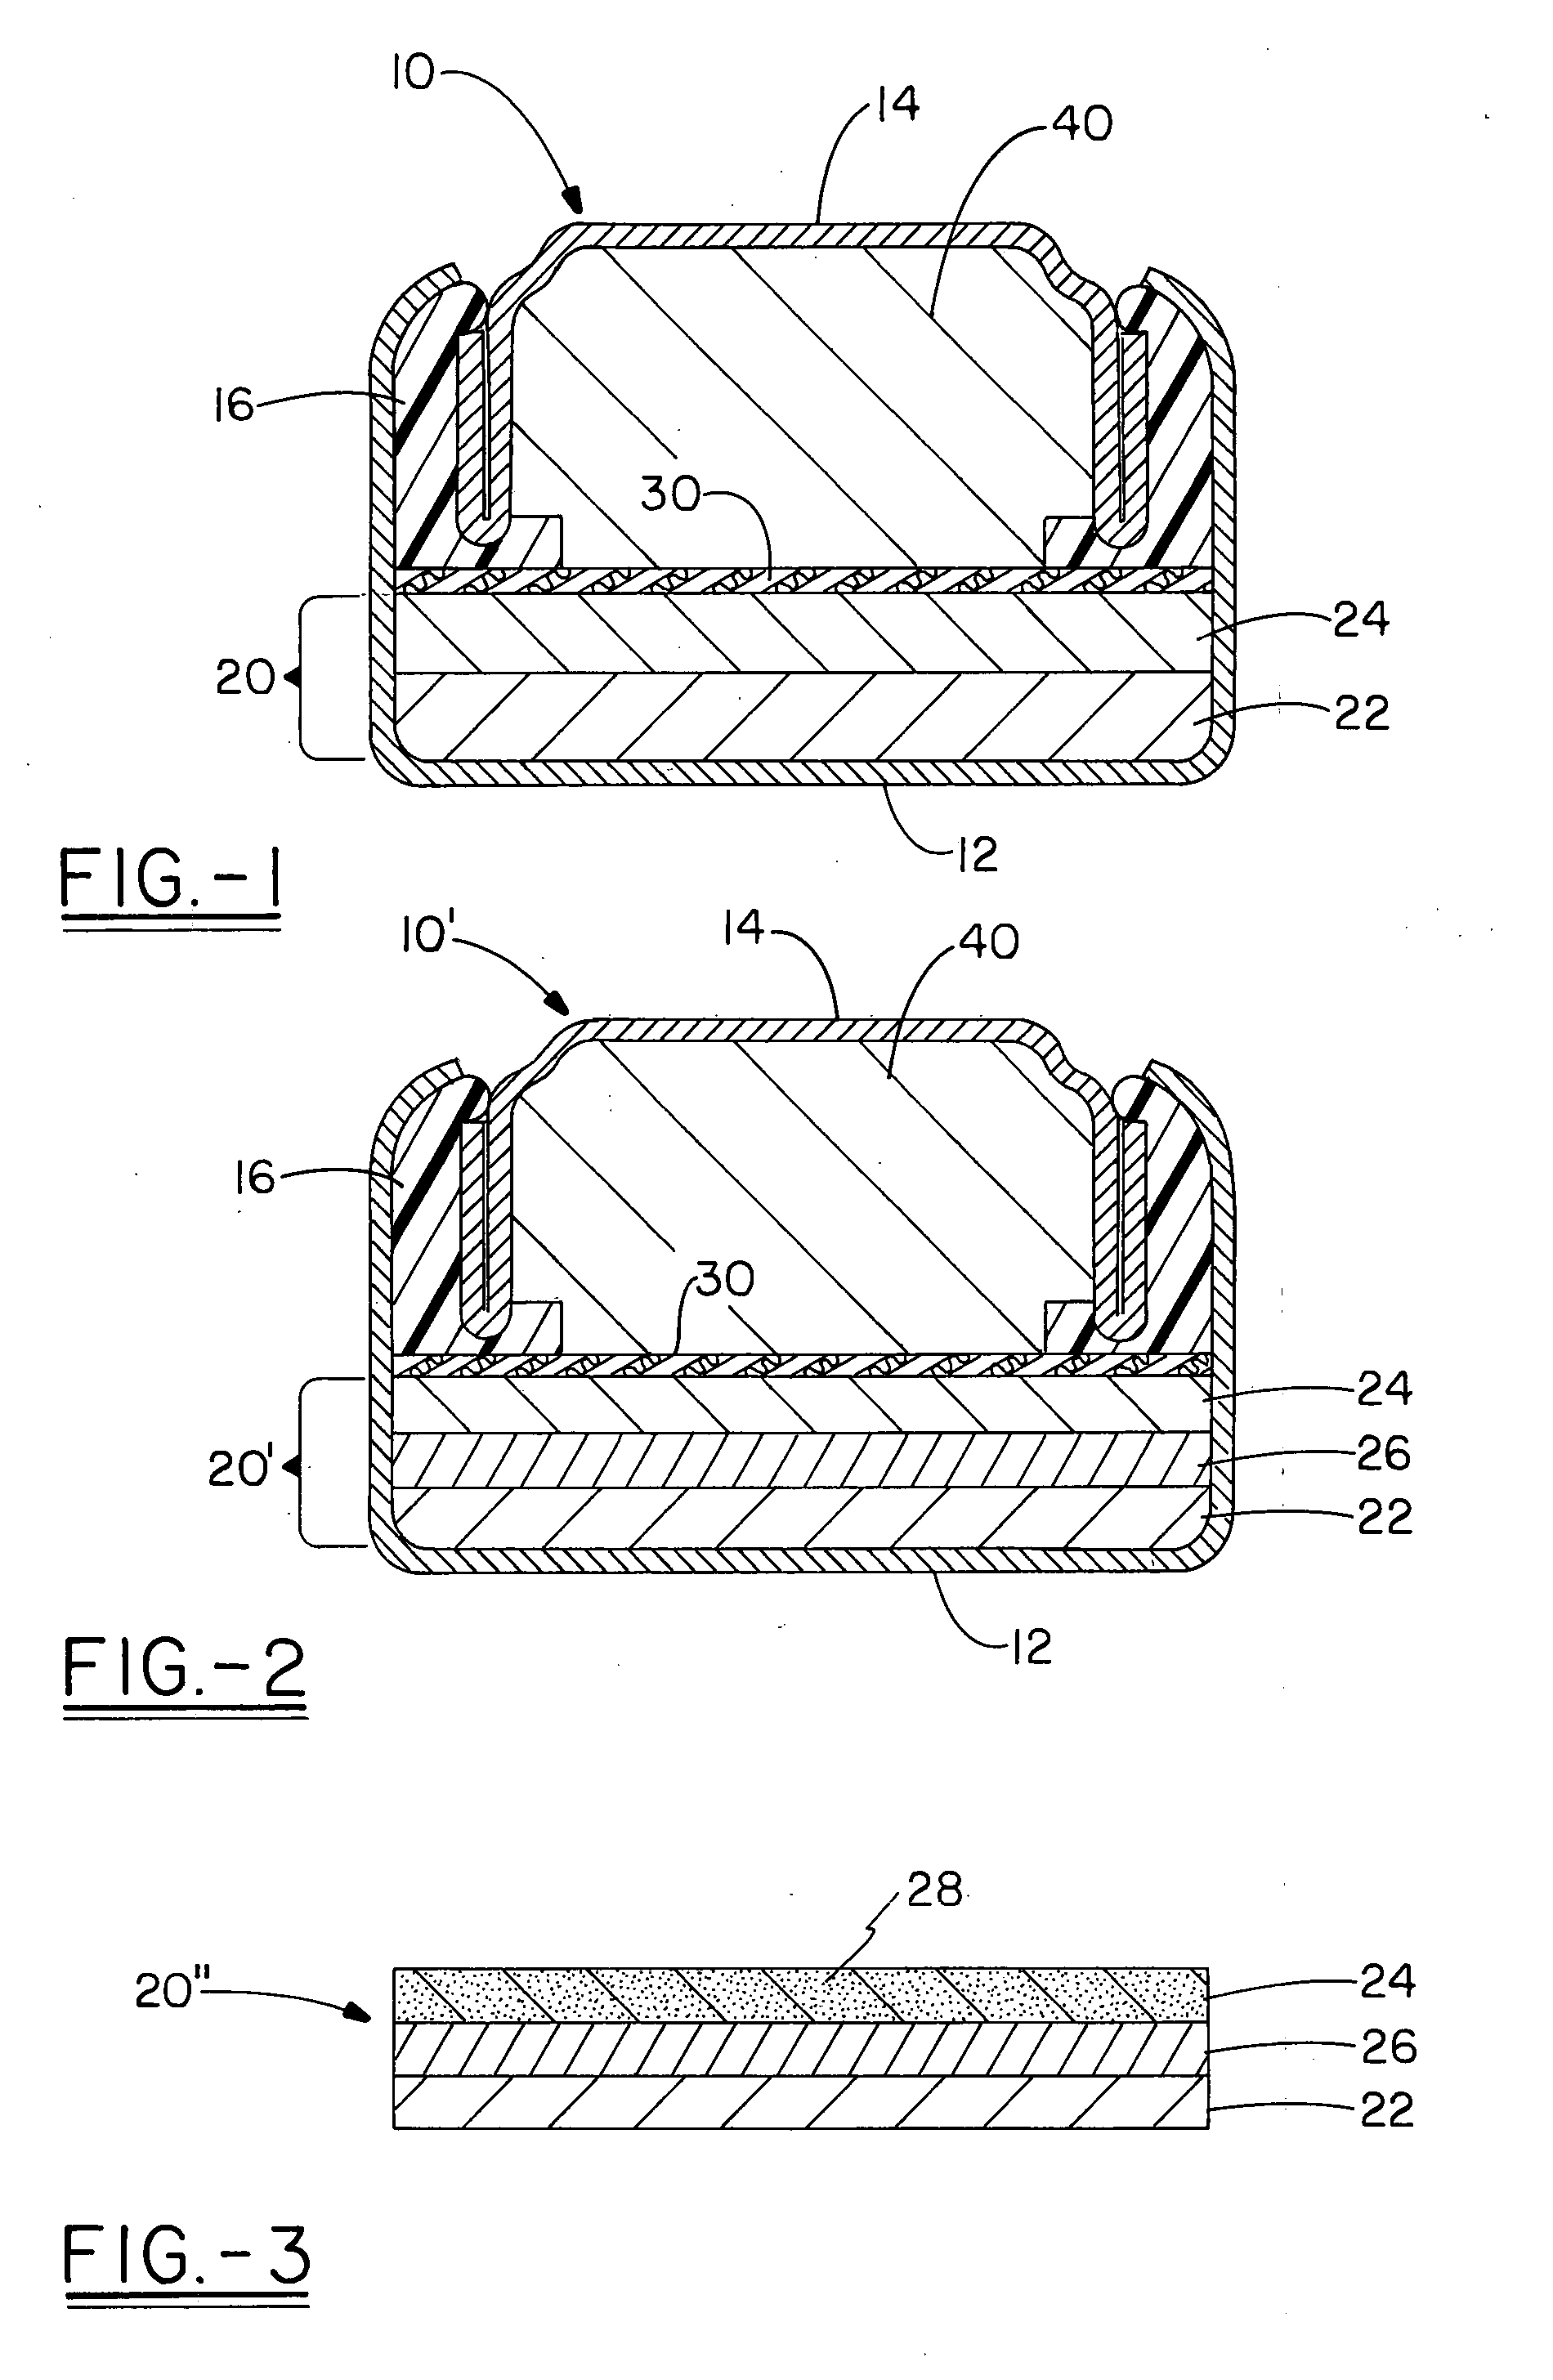 Multi-layer positive electrode structures having a silver-containing layer for miniature cells